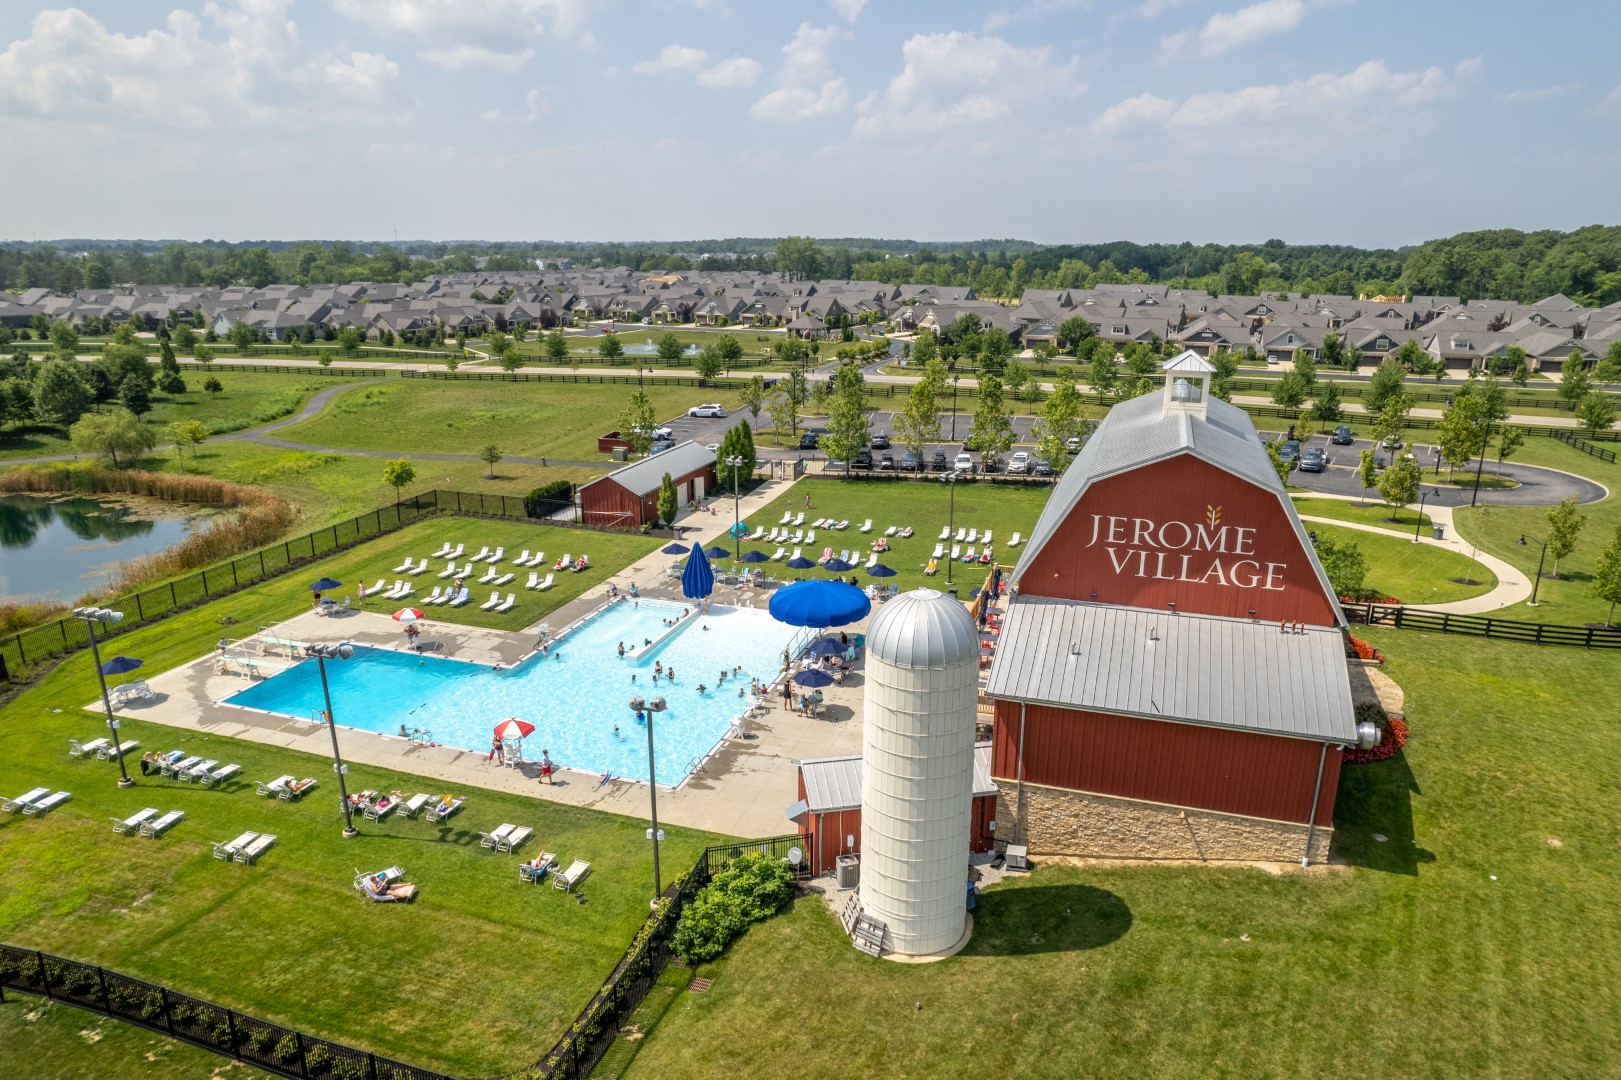 The Meadowlark Neighborhood is perfect for families looking for a quiet, family-friendly community to relax, enjoy and grow together. From its barn-inspired community center, swimming pool, and fitness facility to the more than 15 miles of picturesque walking and trails, there is plenty of fun to be had.